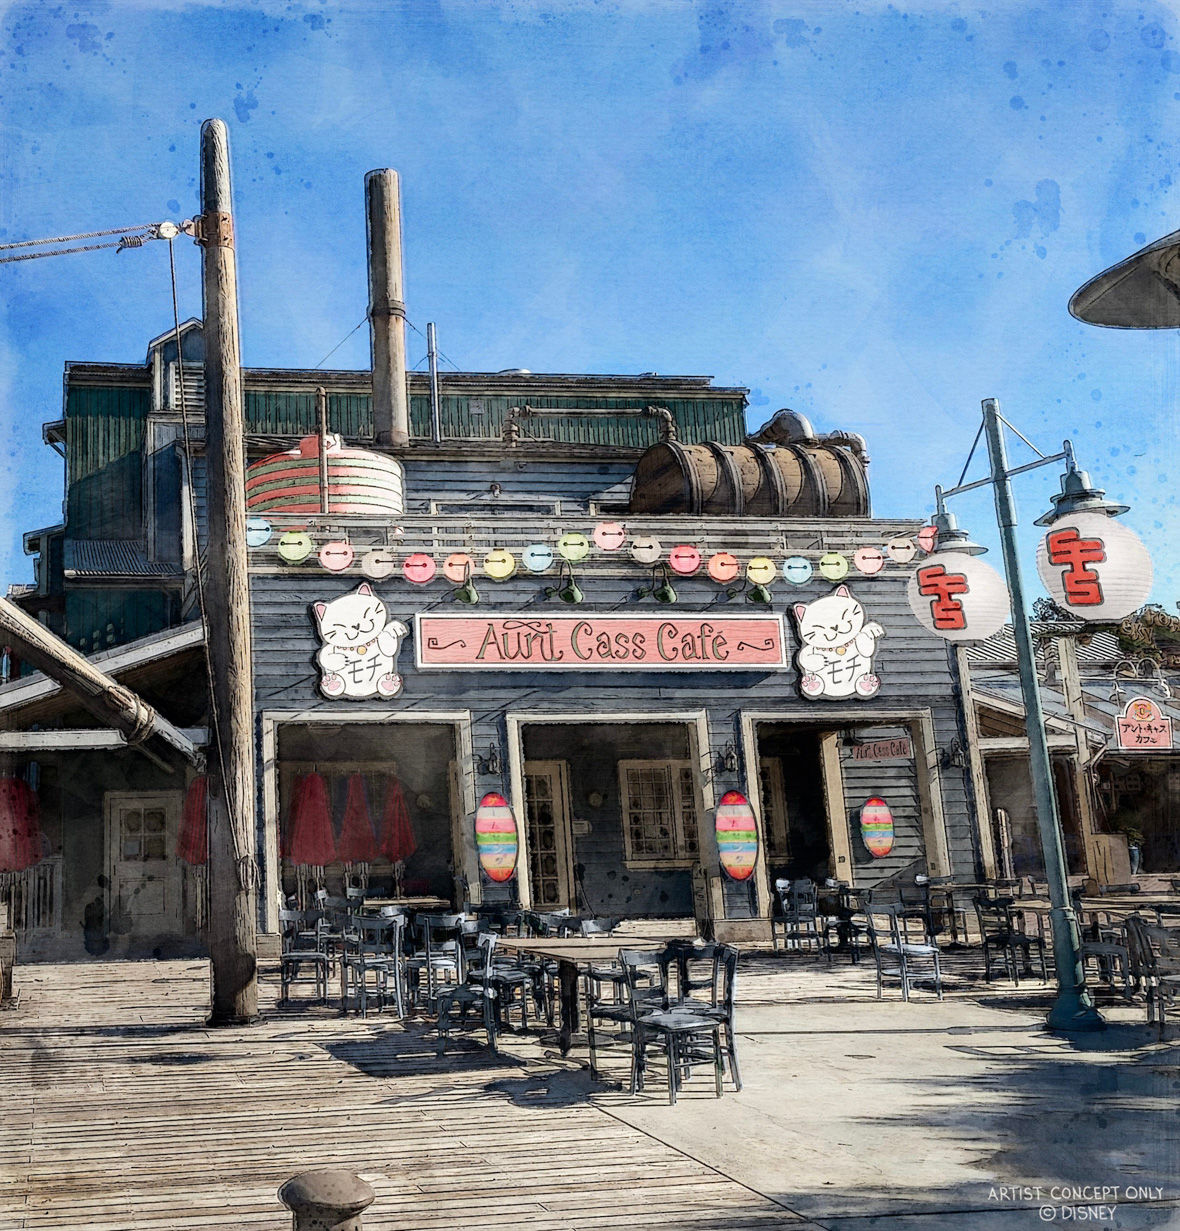 In this artist’s rendering of part of the new San Fransokyo Square area of Disney California Adventure at Disneyland Resort, a building with a pink sign reading “Aunt Cass Cafe” sits on a wooden deck with black chairs and brown tables outside. Images of two white cats are on either side of the sign, smiling, and colorful lanterns line the roof with Baymax’s face on them.